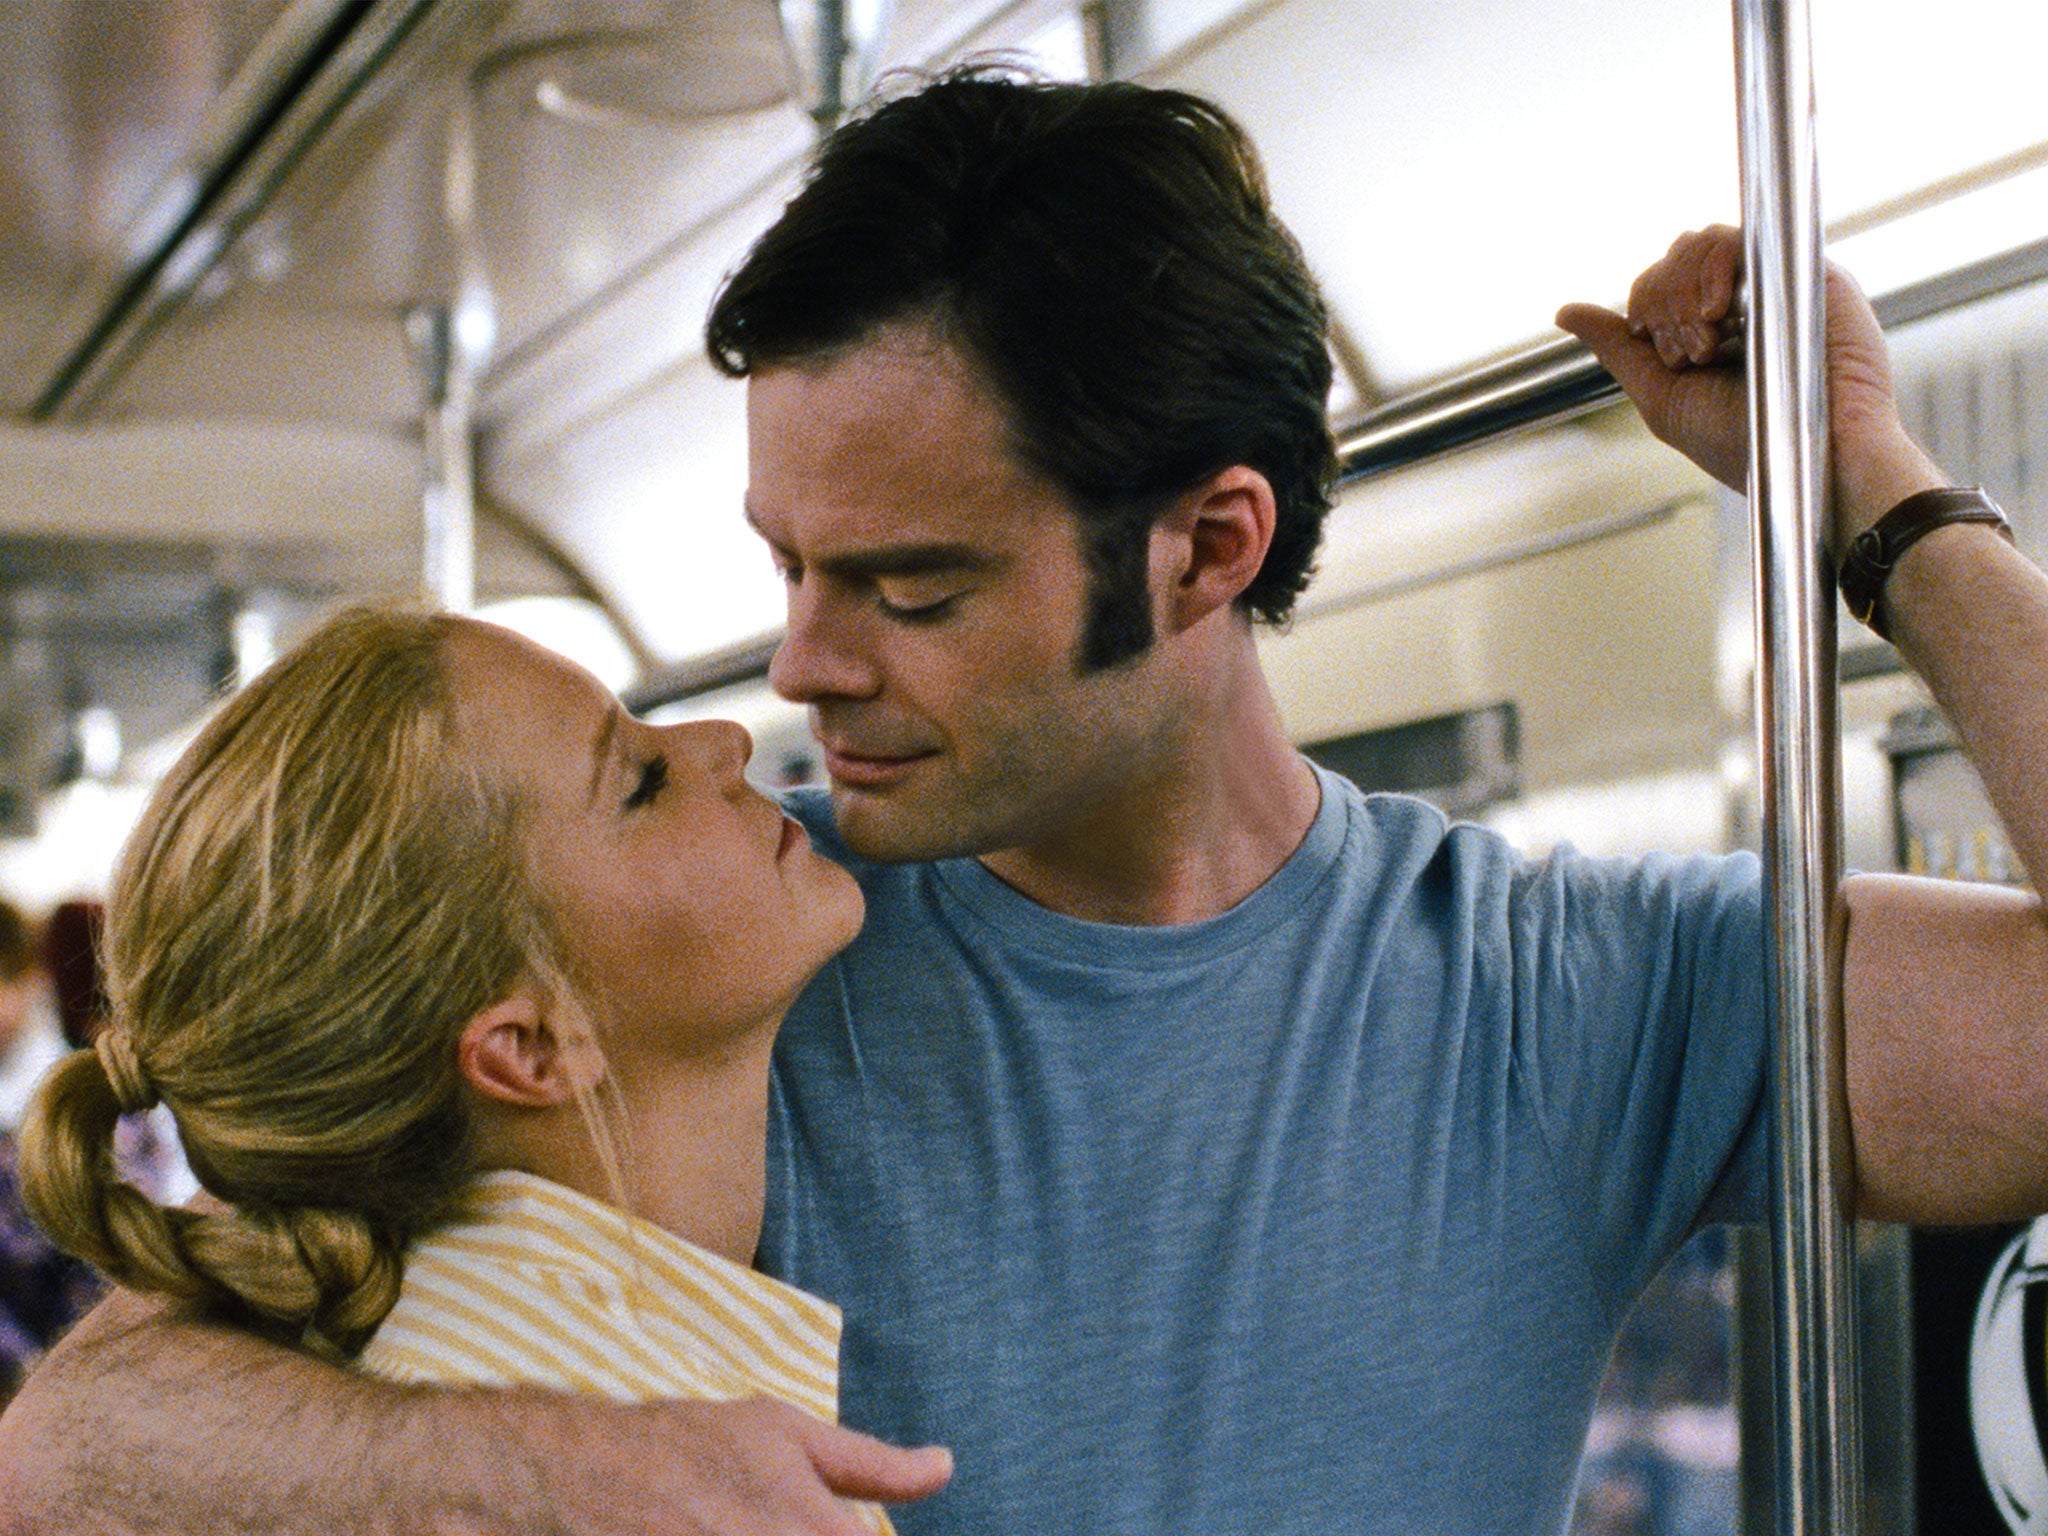 Up close and personal: Amy Schumer and Bill Hader